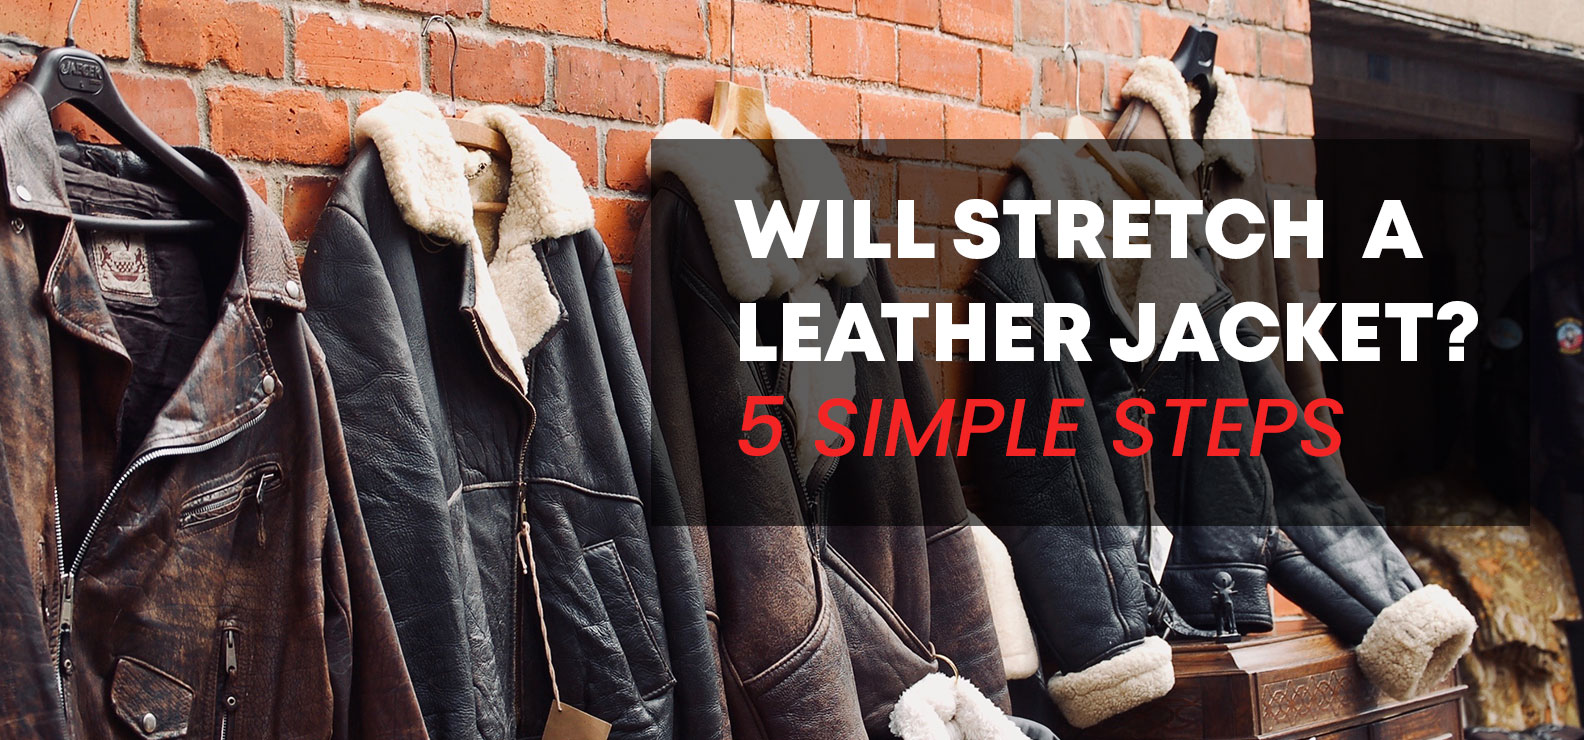 How-to-stretch-a-leather-jacket-Simple-5-Steps